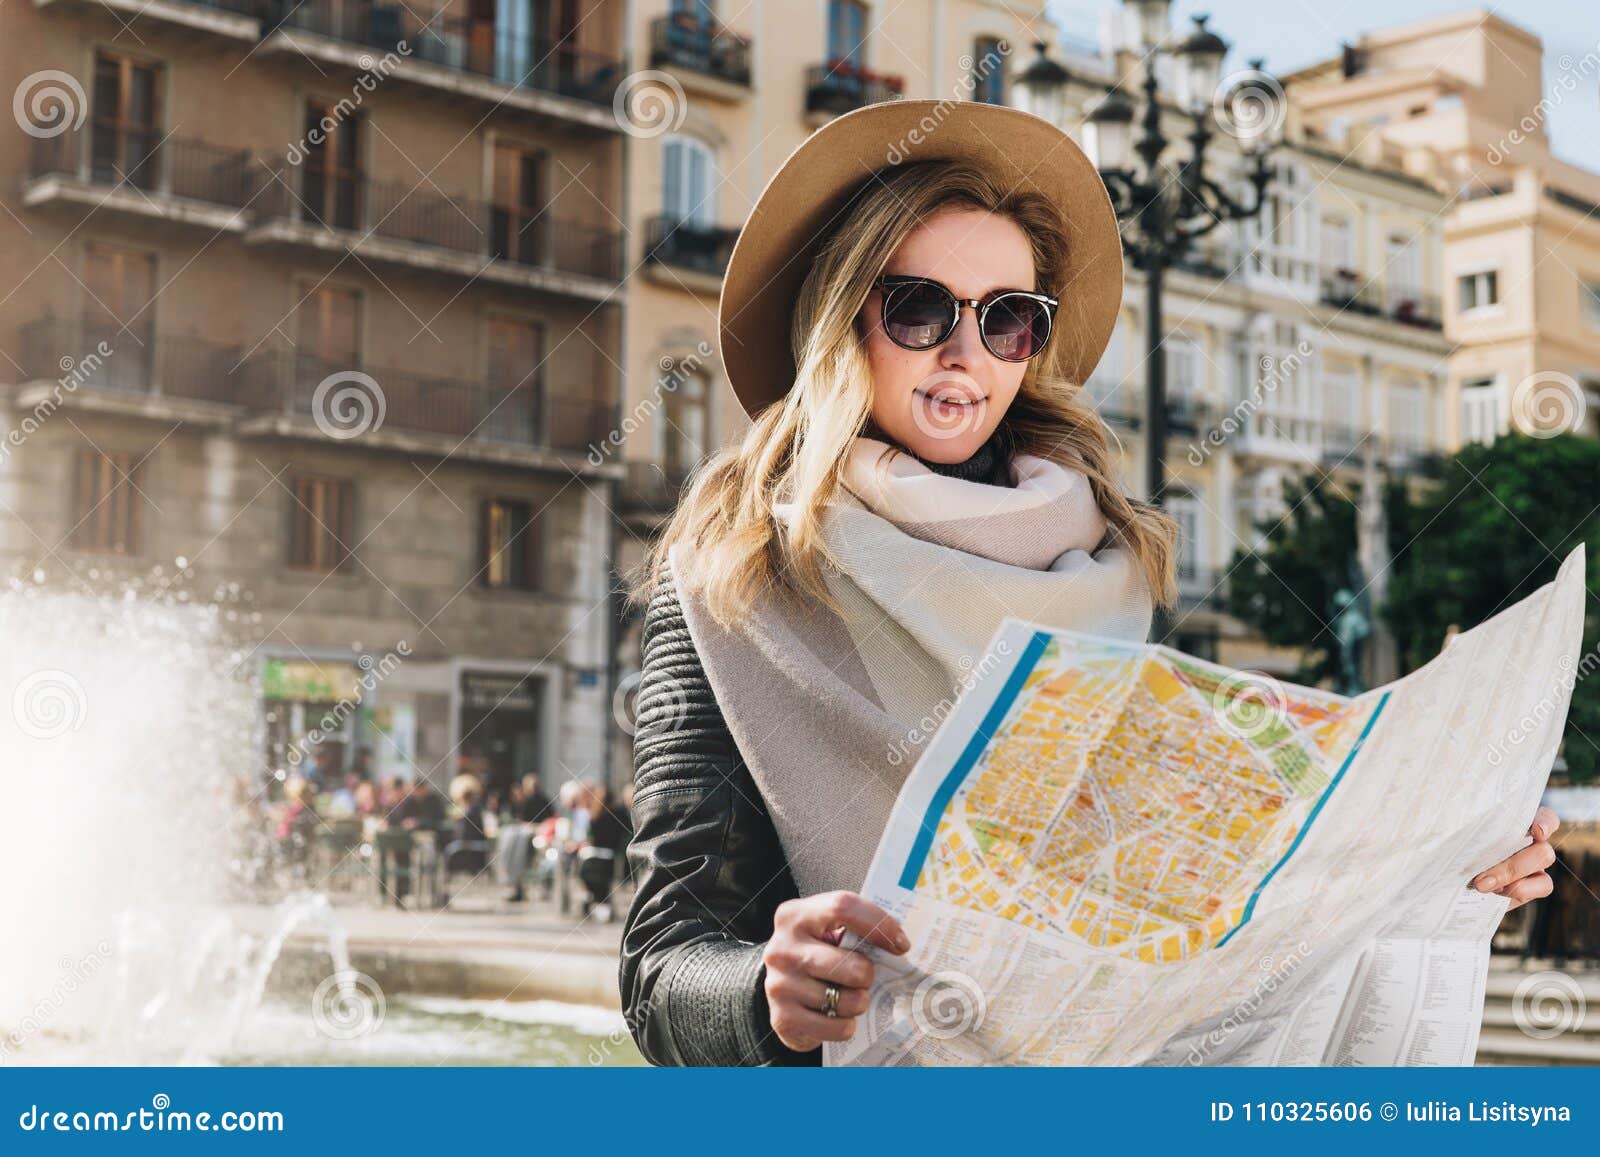 young woman tourist stands on street of ancient european city and holds map. in background is beautiful building.